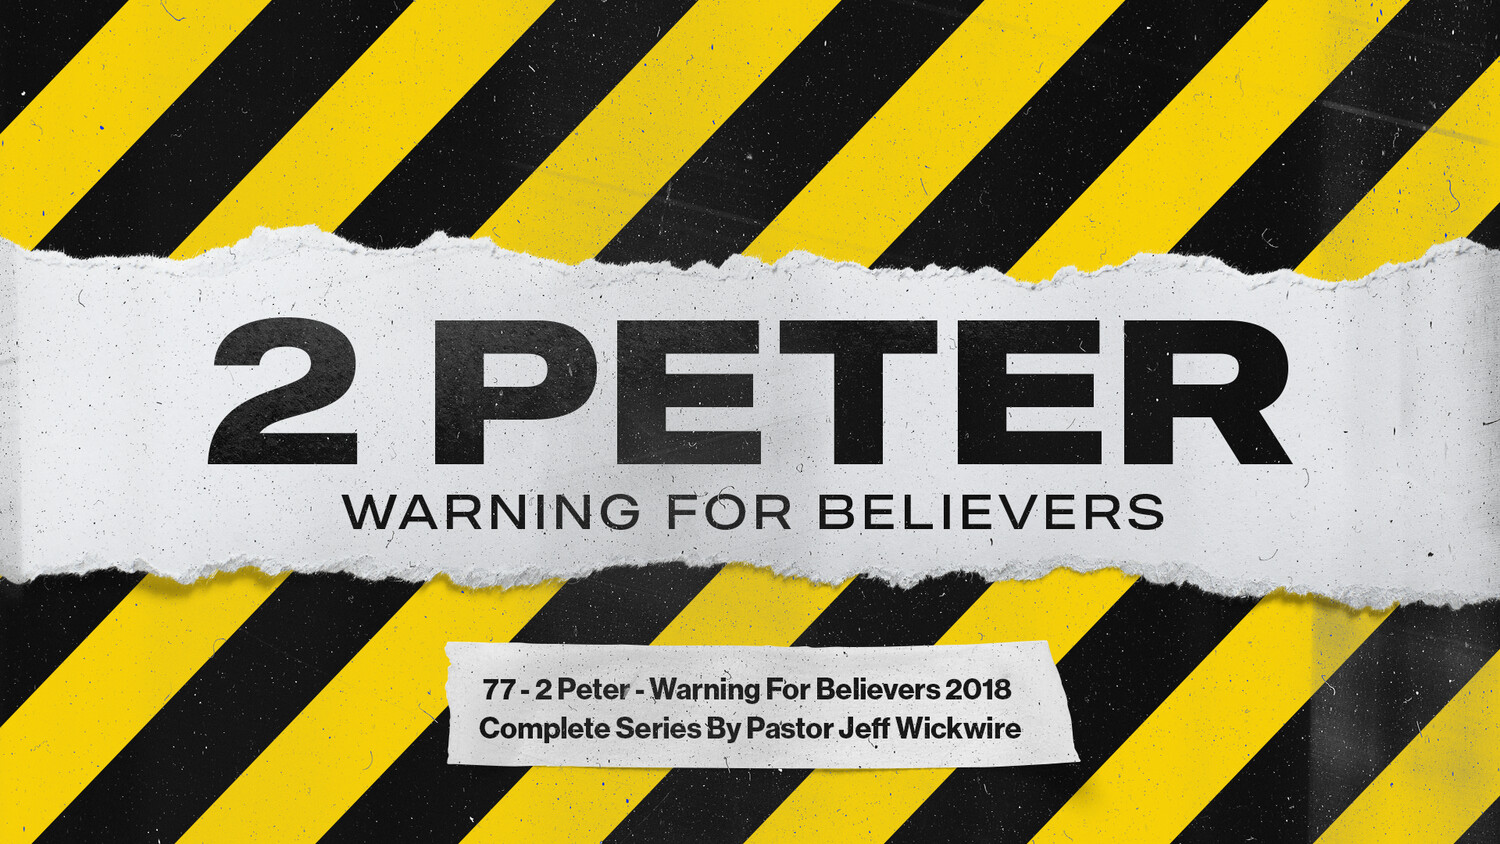 77 - 2 Peter - Warning For Believers 2018 - Complete Series By Pastor Jeff Wickwire